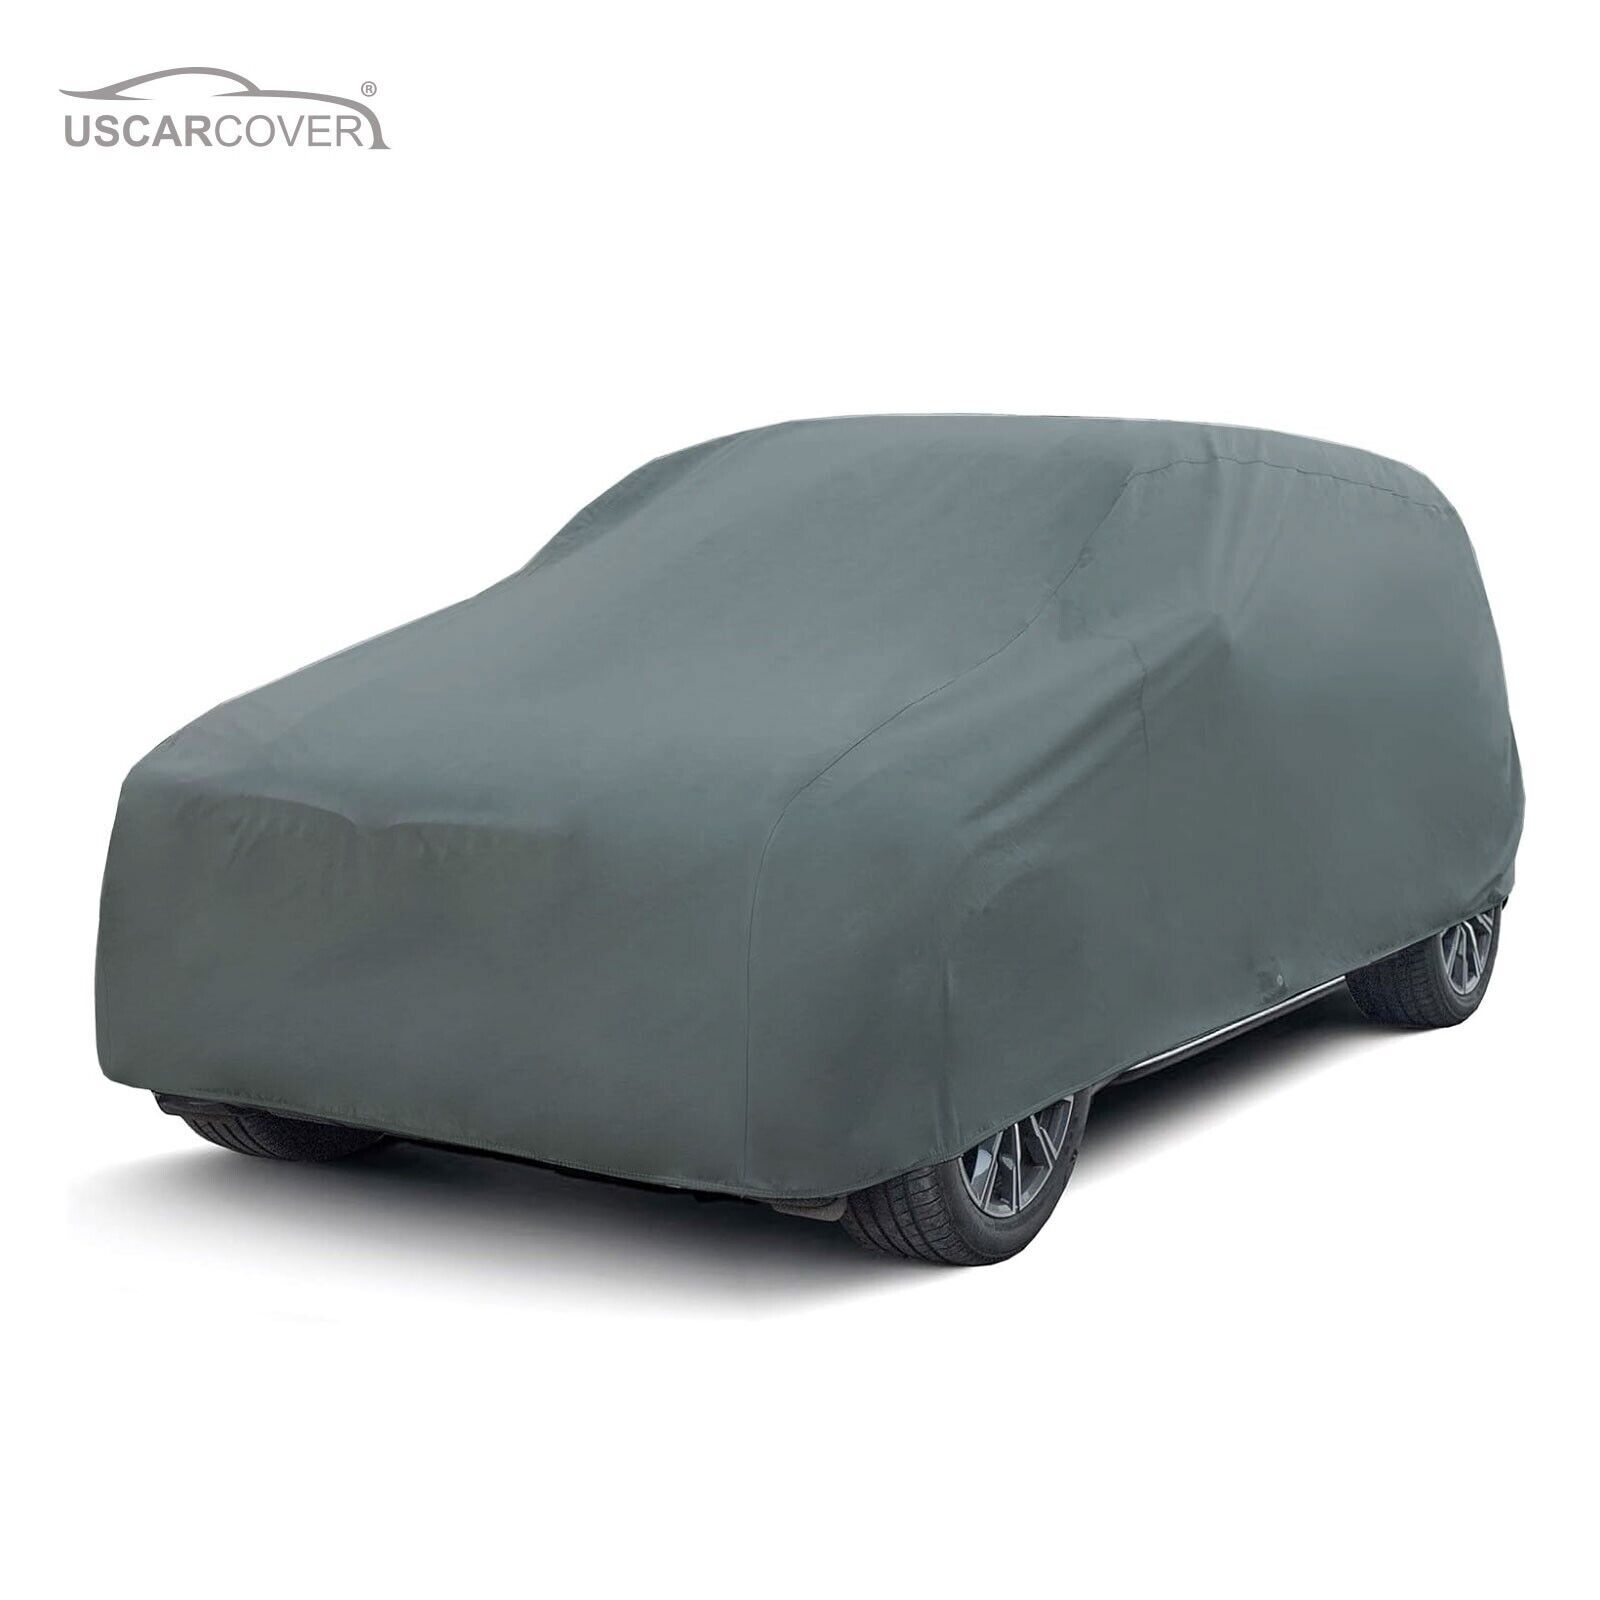 WeatherTec UHD 5 Layer Full SUV Car Cover for Ford Deluxe 1937-1940 Sedan